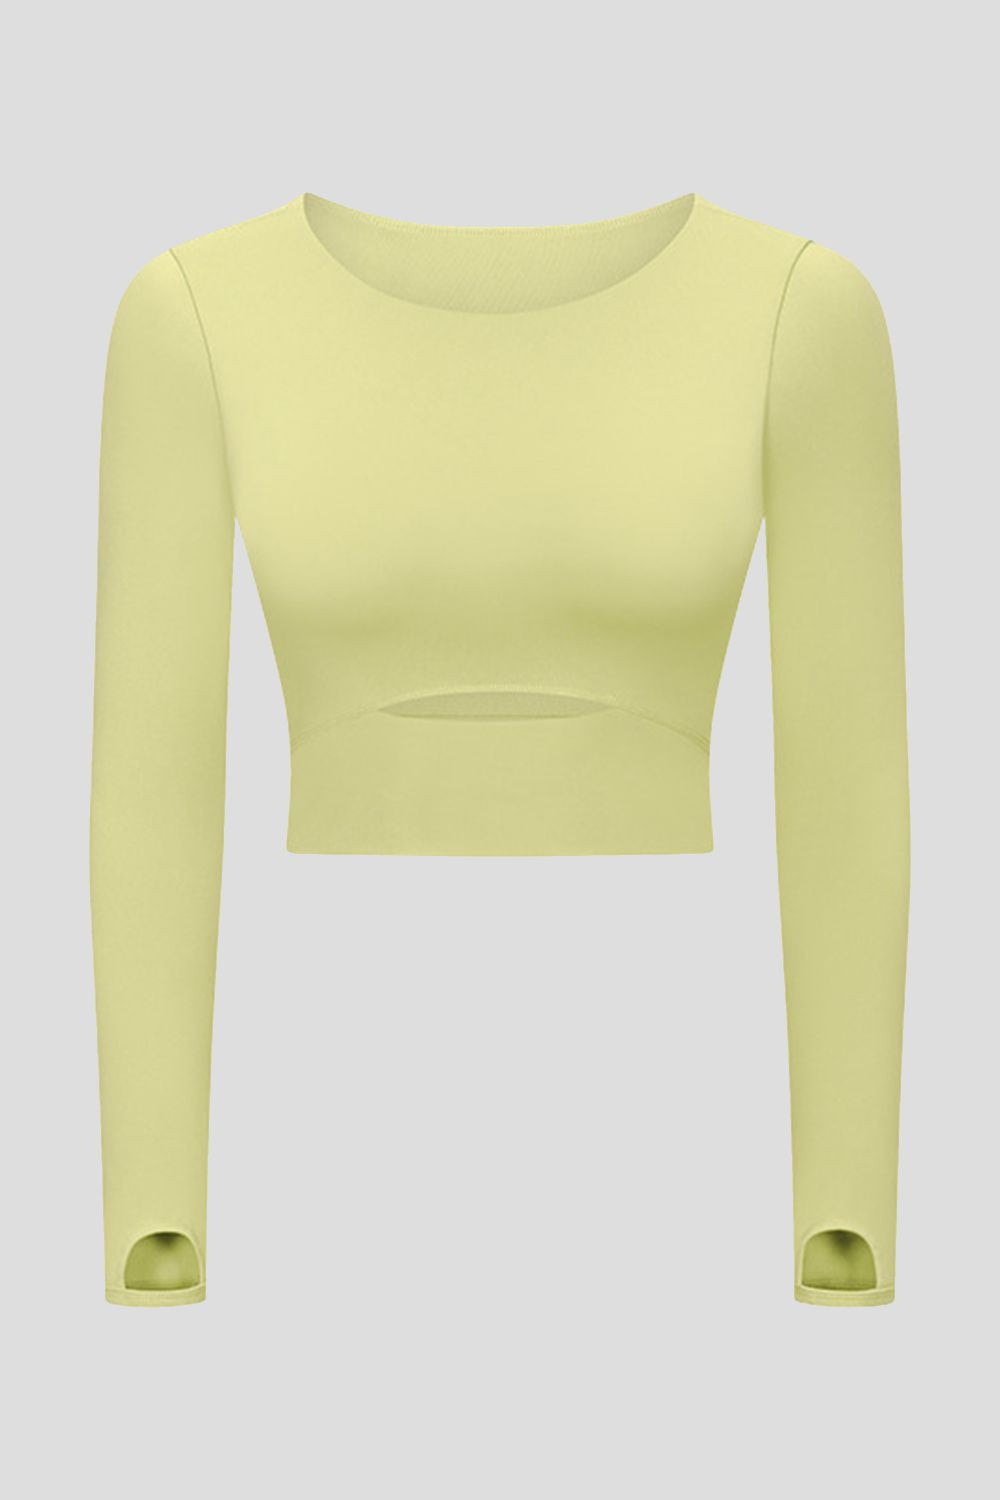 Cut Out Front Crop Yoga Tee - Keene's